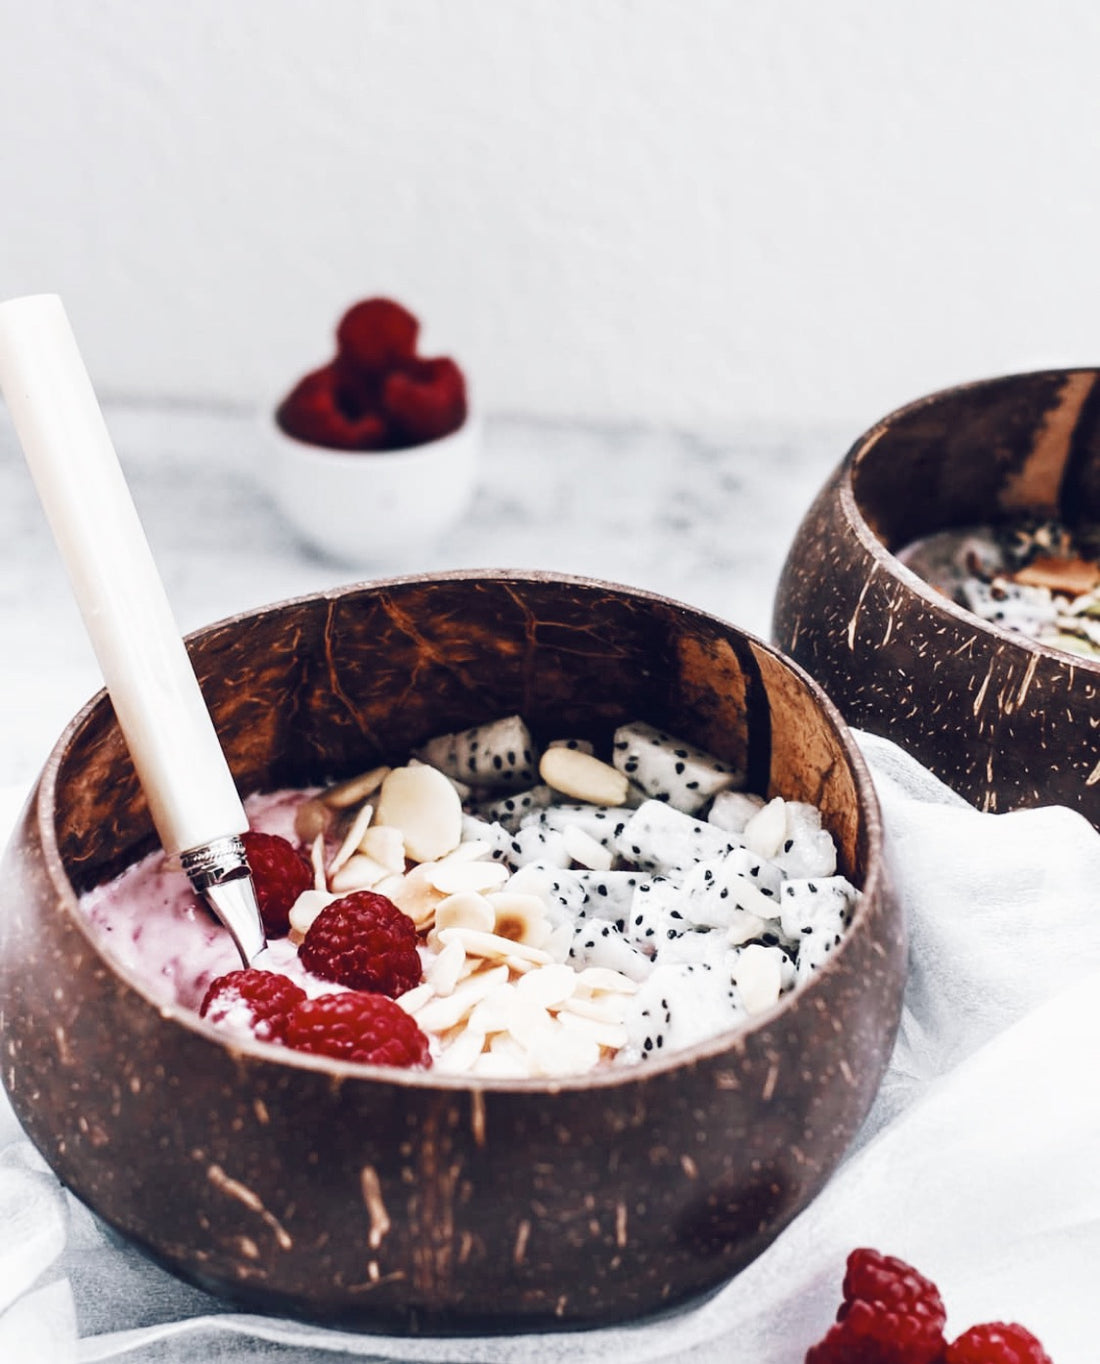 coconut bowl eco-friendly crafted by hand sustainable coconut shell